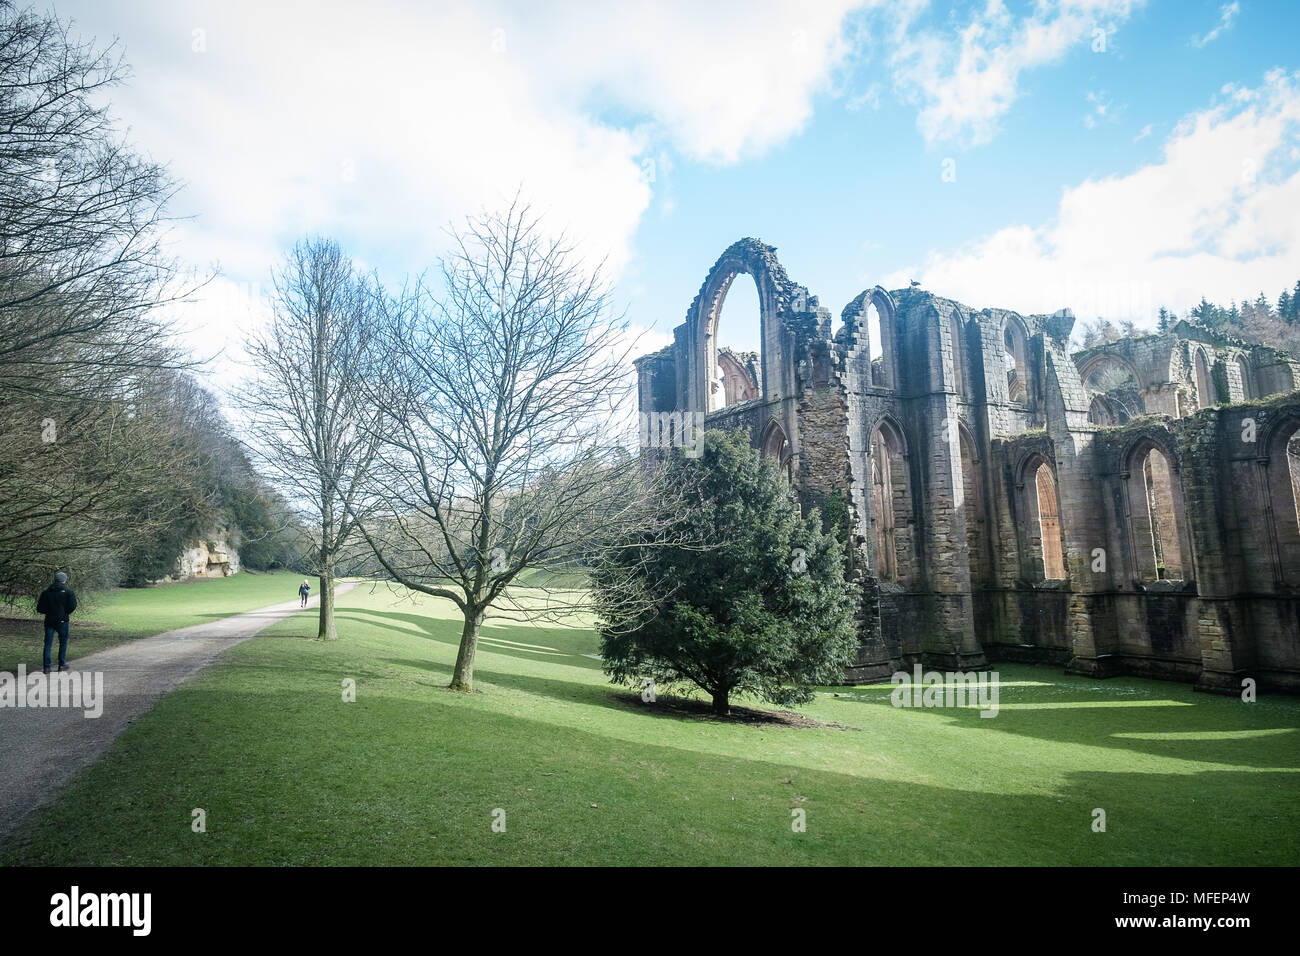 Fountains Abbey, proprietà del National Trust, Studley Royal, North Yorkshire Foto Stock